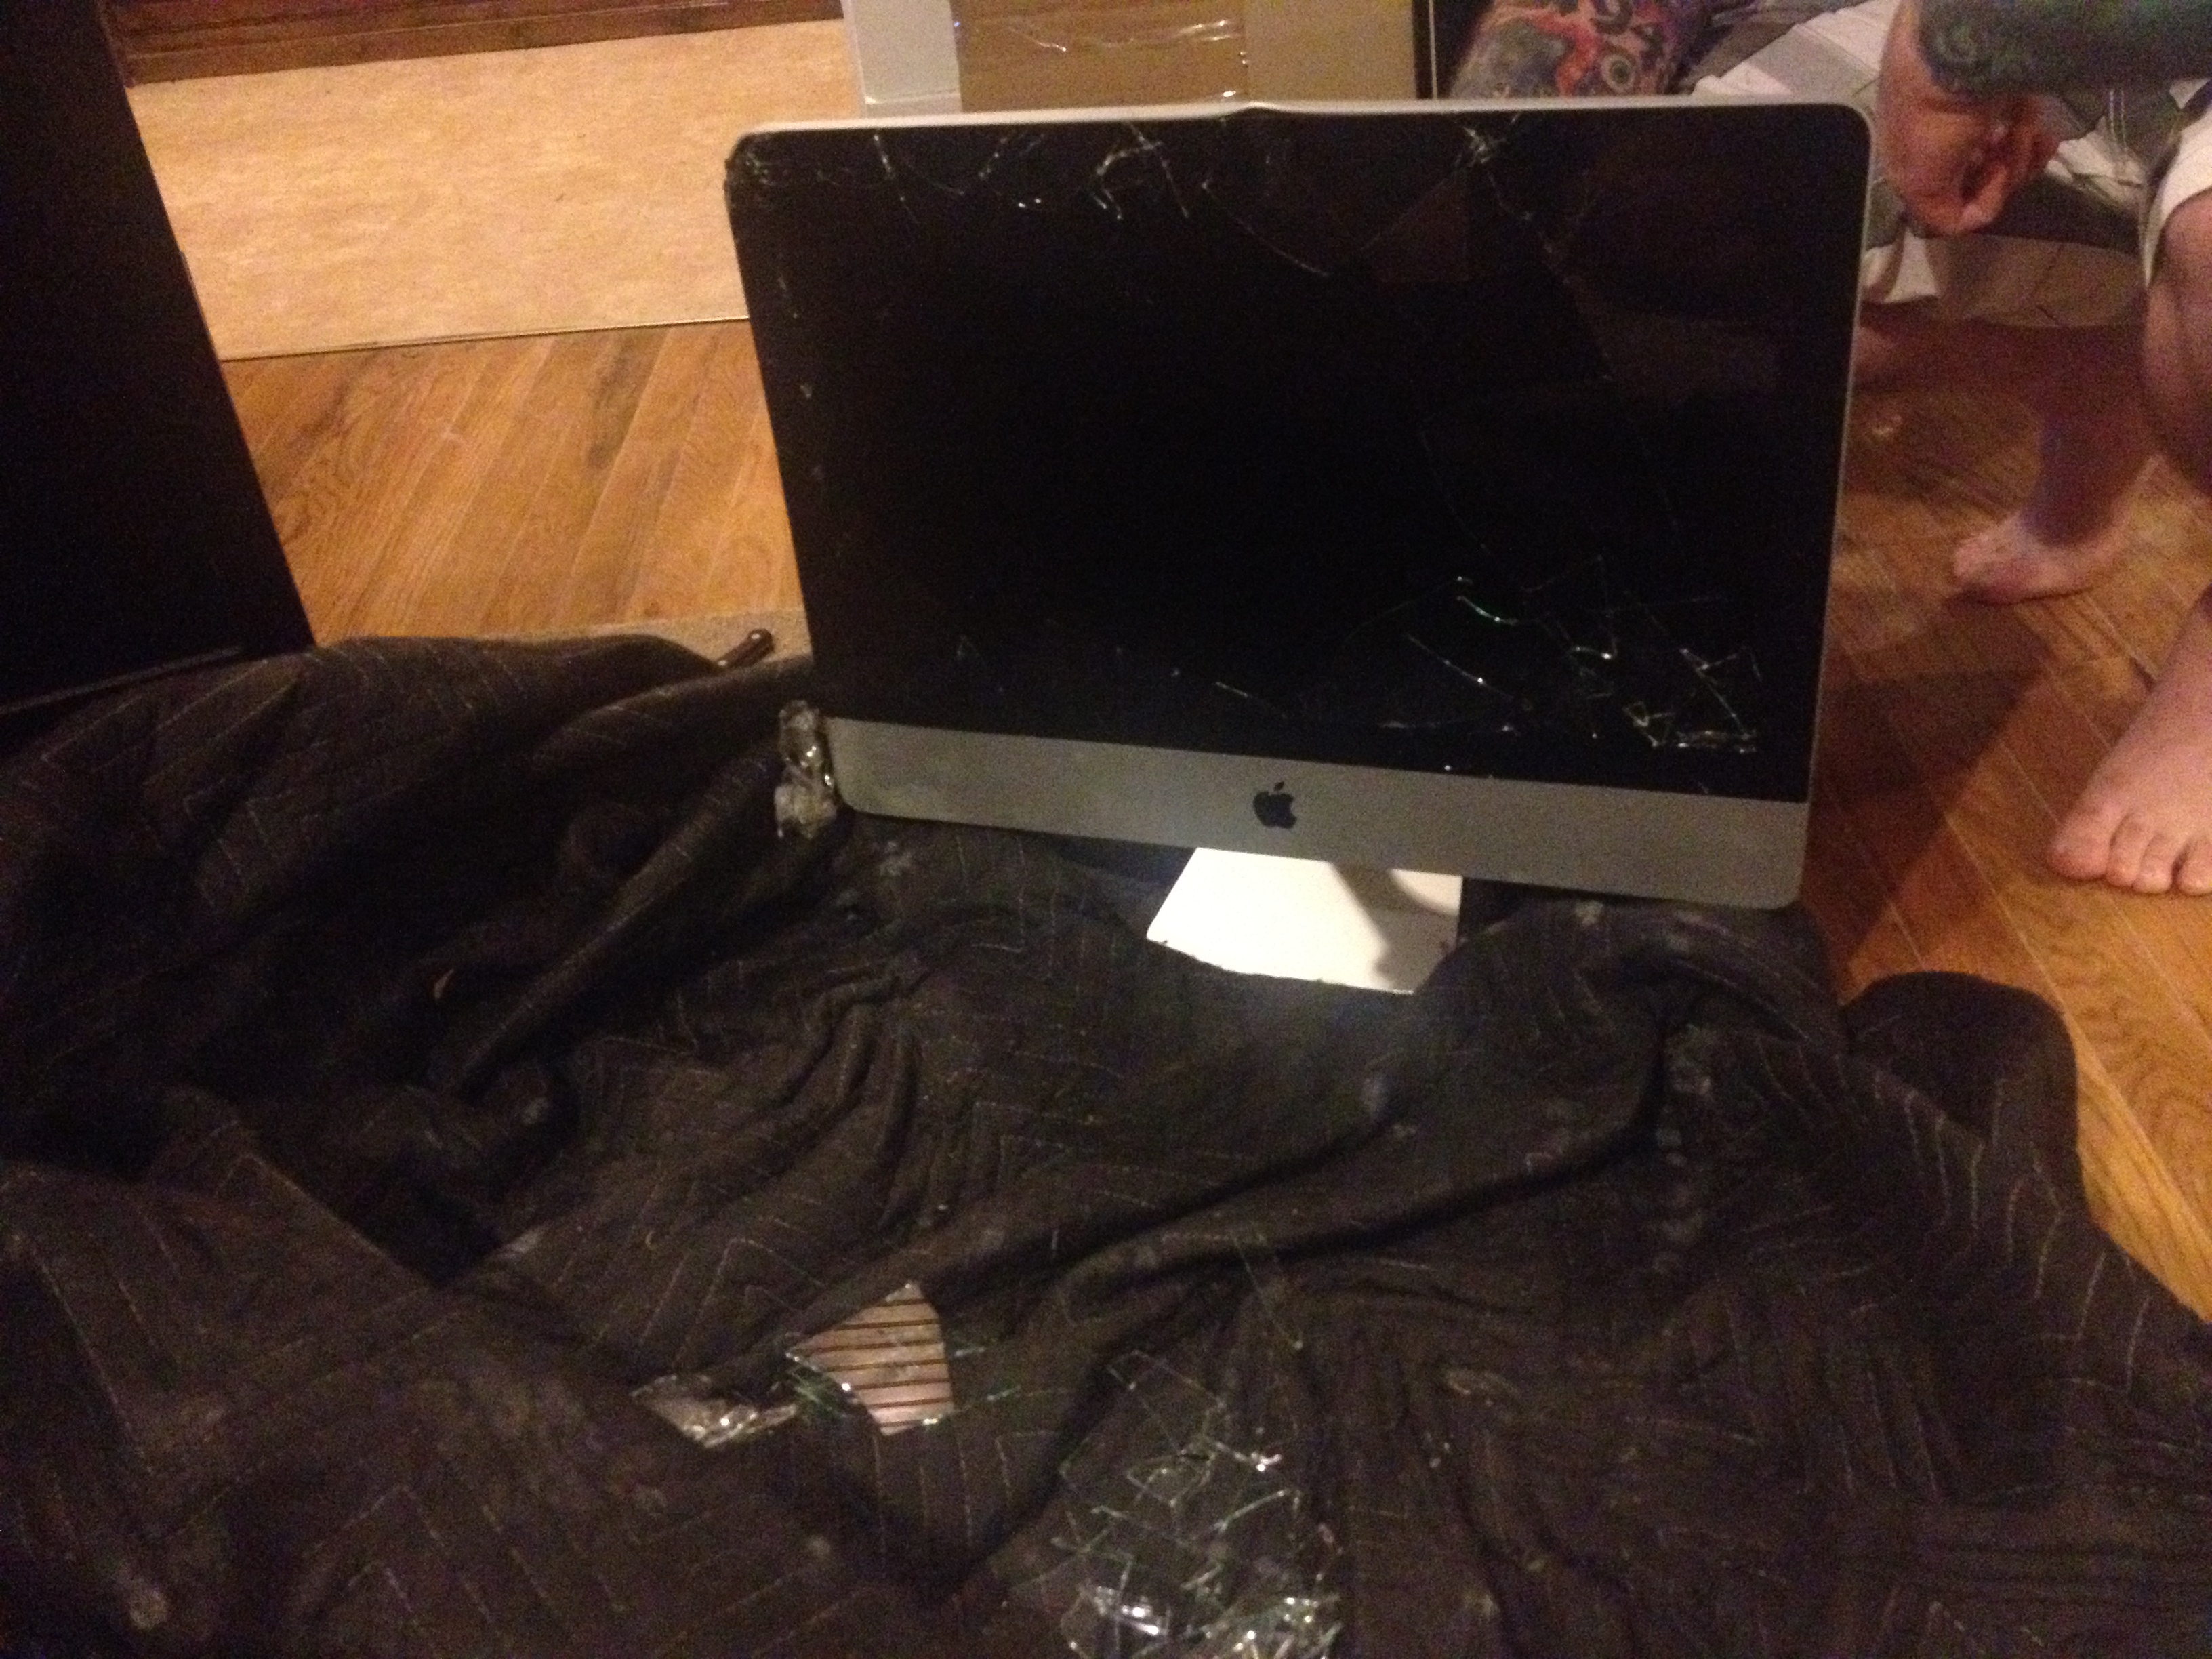 Broken/Shattered Imac- you can see the dent in the frame as if somebody took a sledge hammer to it.